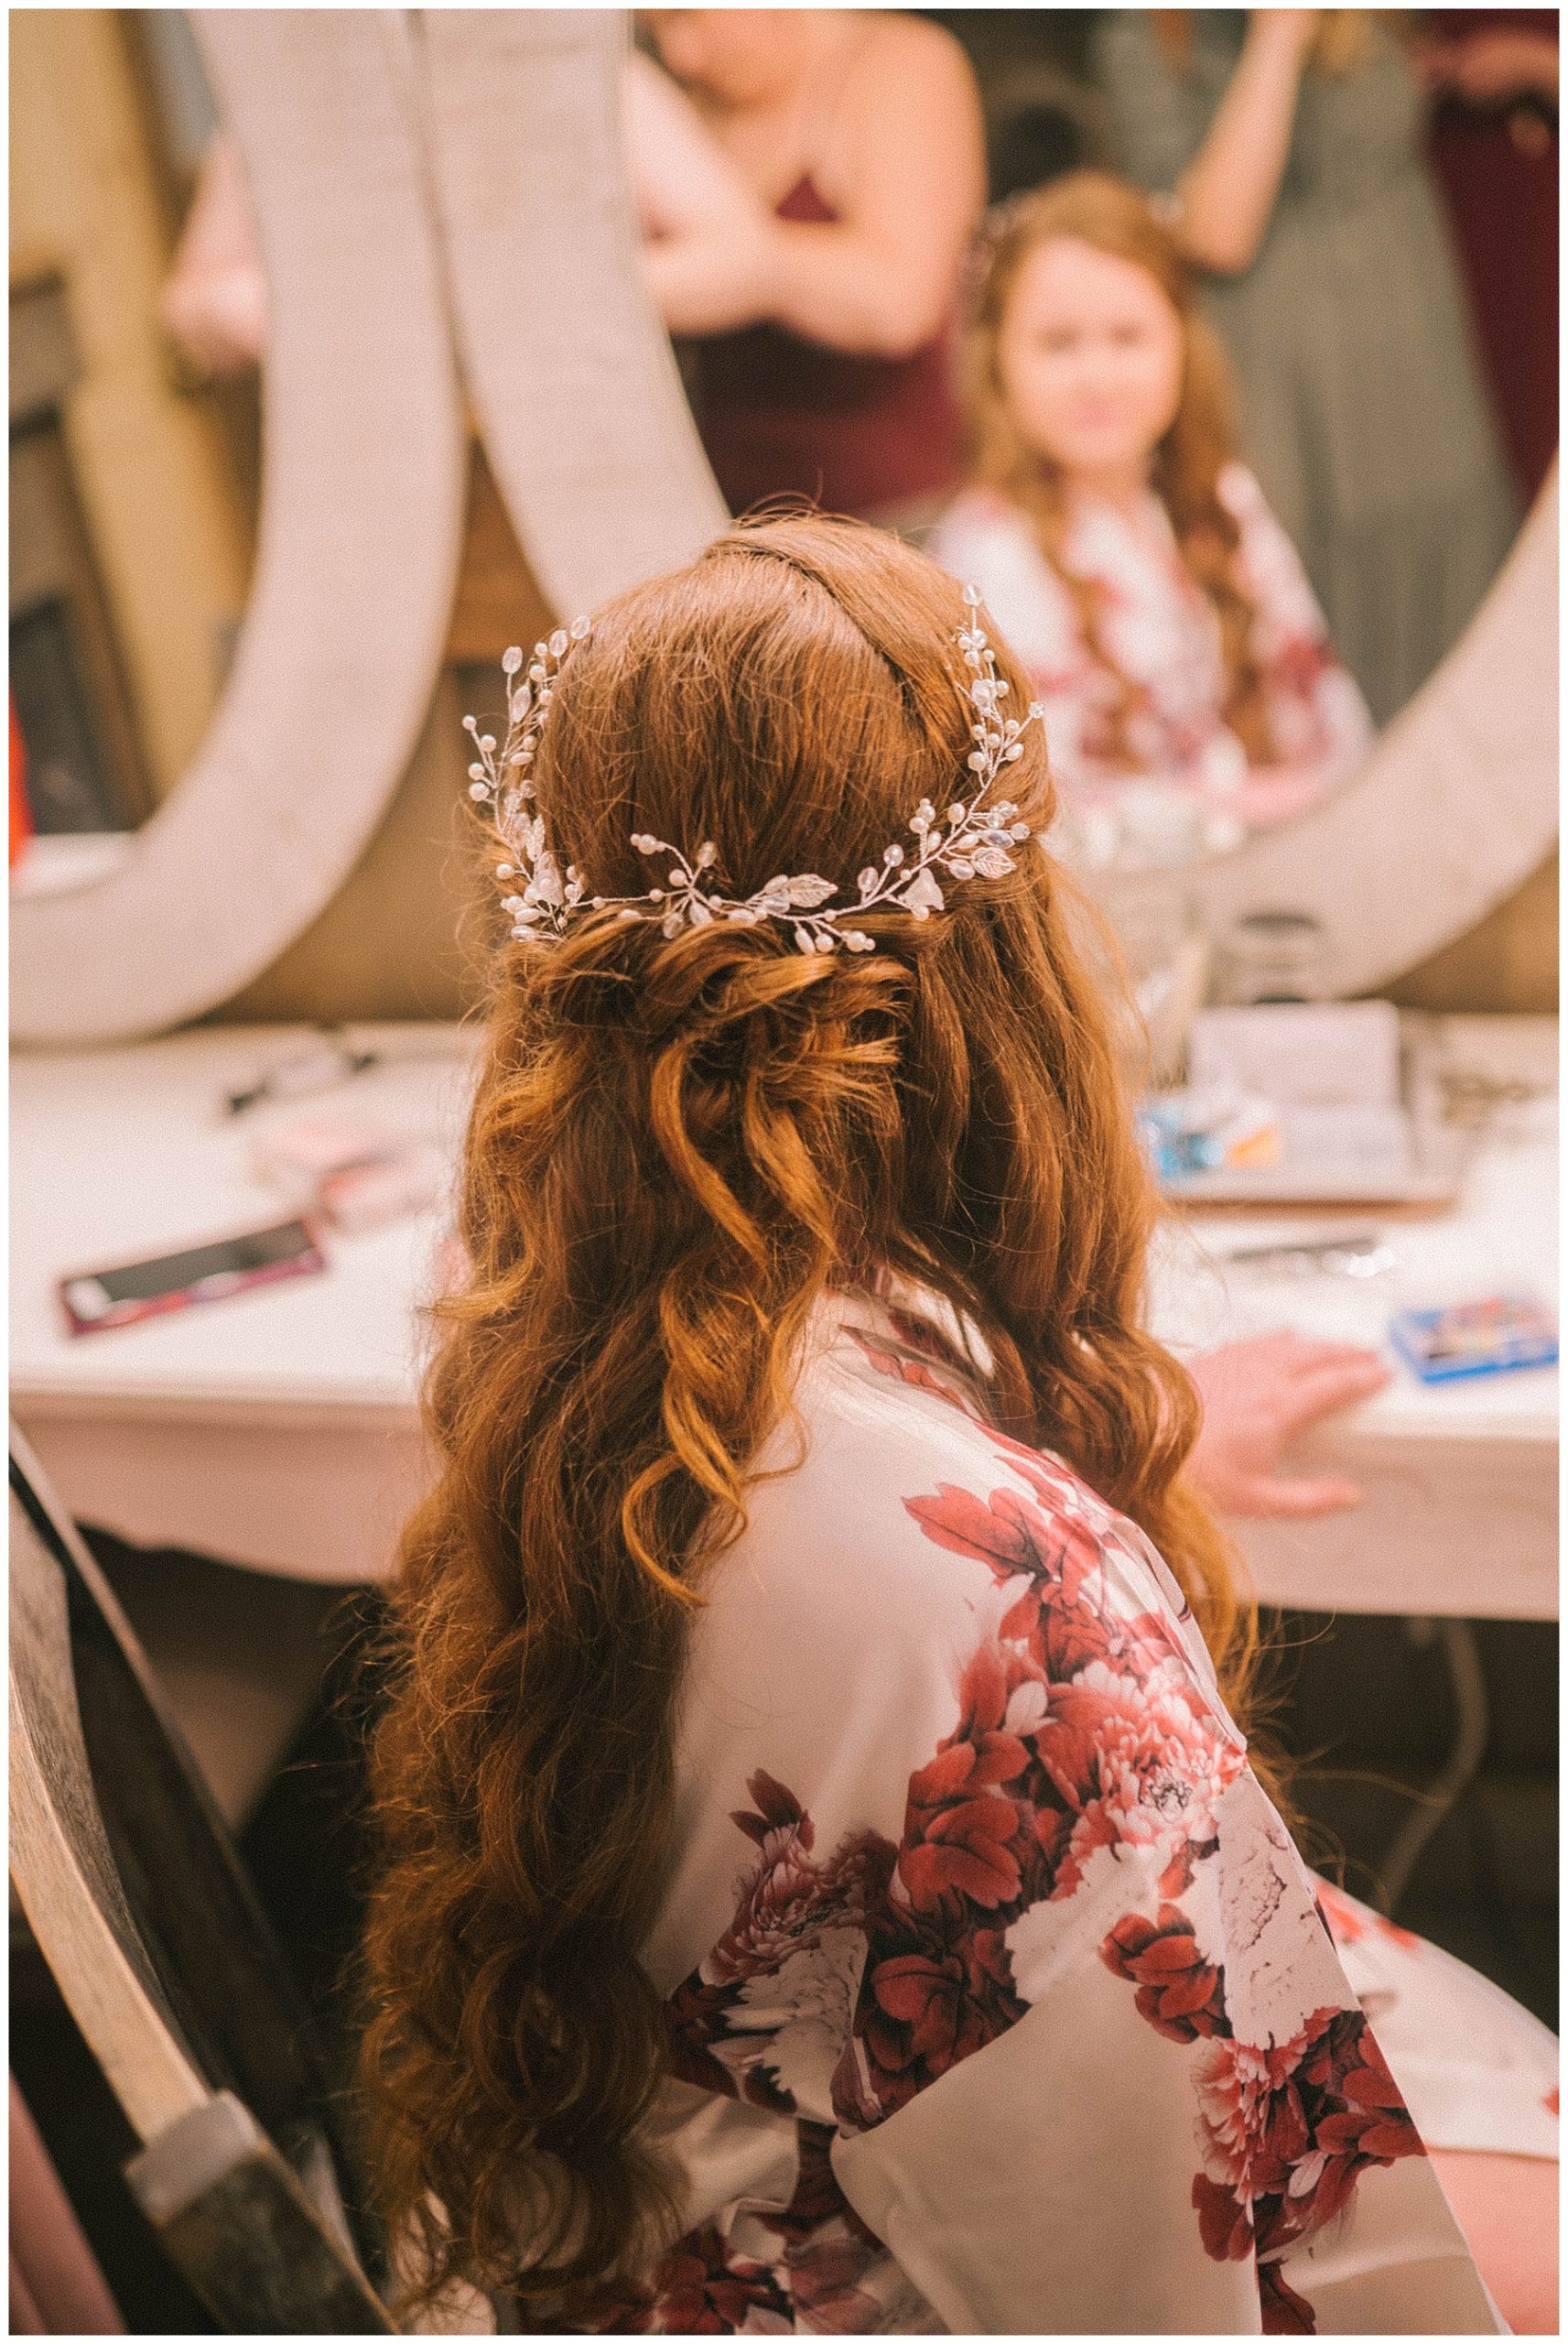 bride looking into mirror on wedding day before walking down the aisle